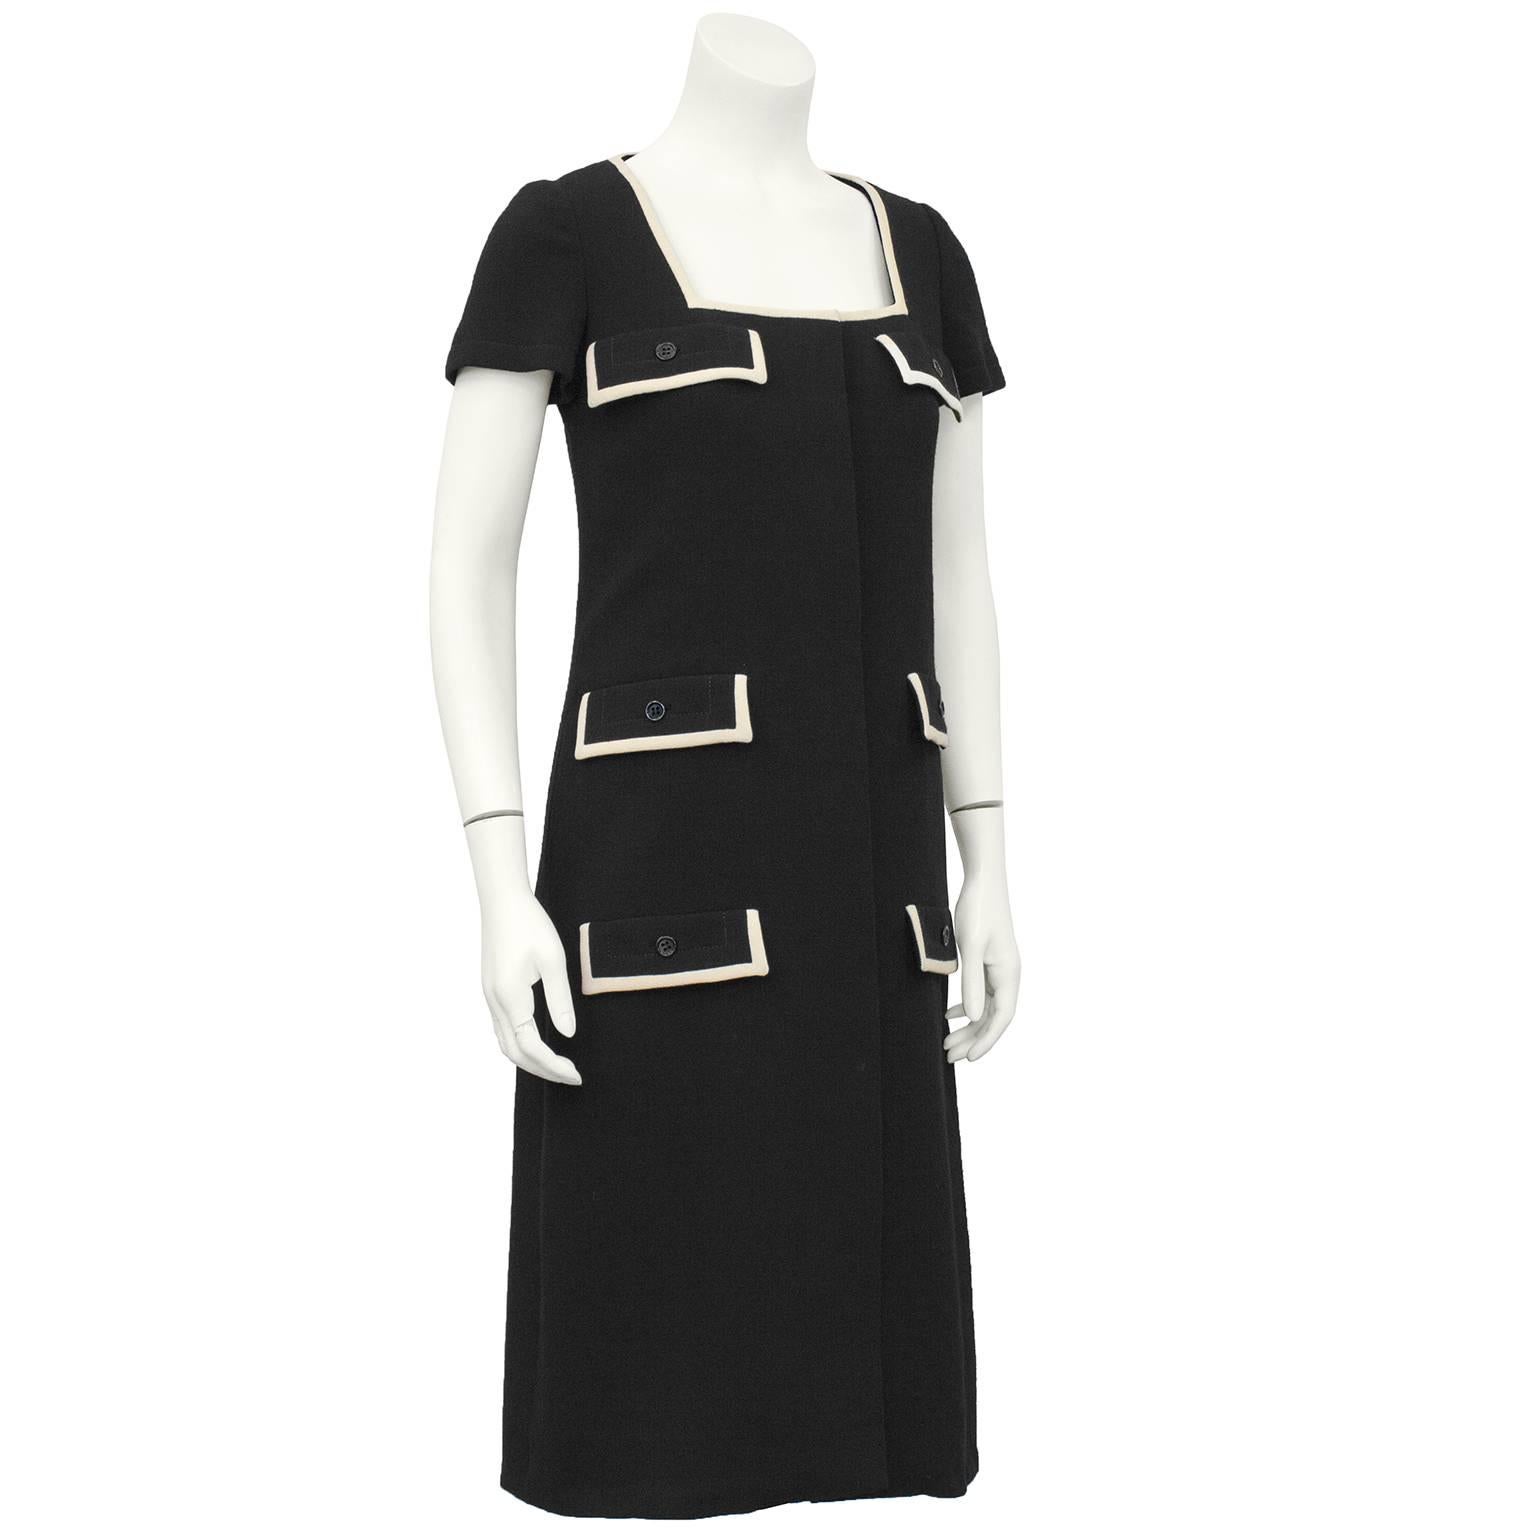 Quintessential 1960's Galanos black wool shift dress with faux flap pocket details and cream wool trim. Square neckline with invisible button closures down front centre. Excellent vintage condition, fits like a US 4-6. perfect fall fashion